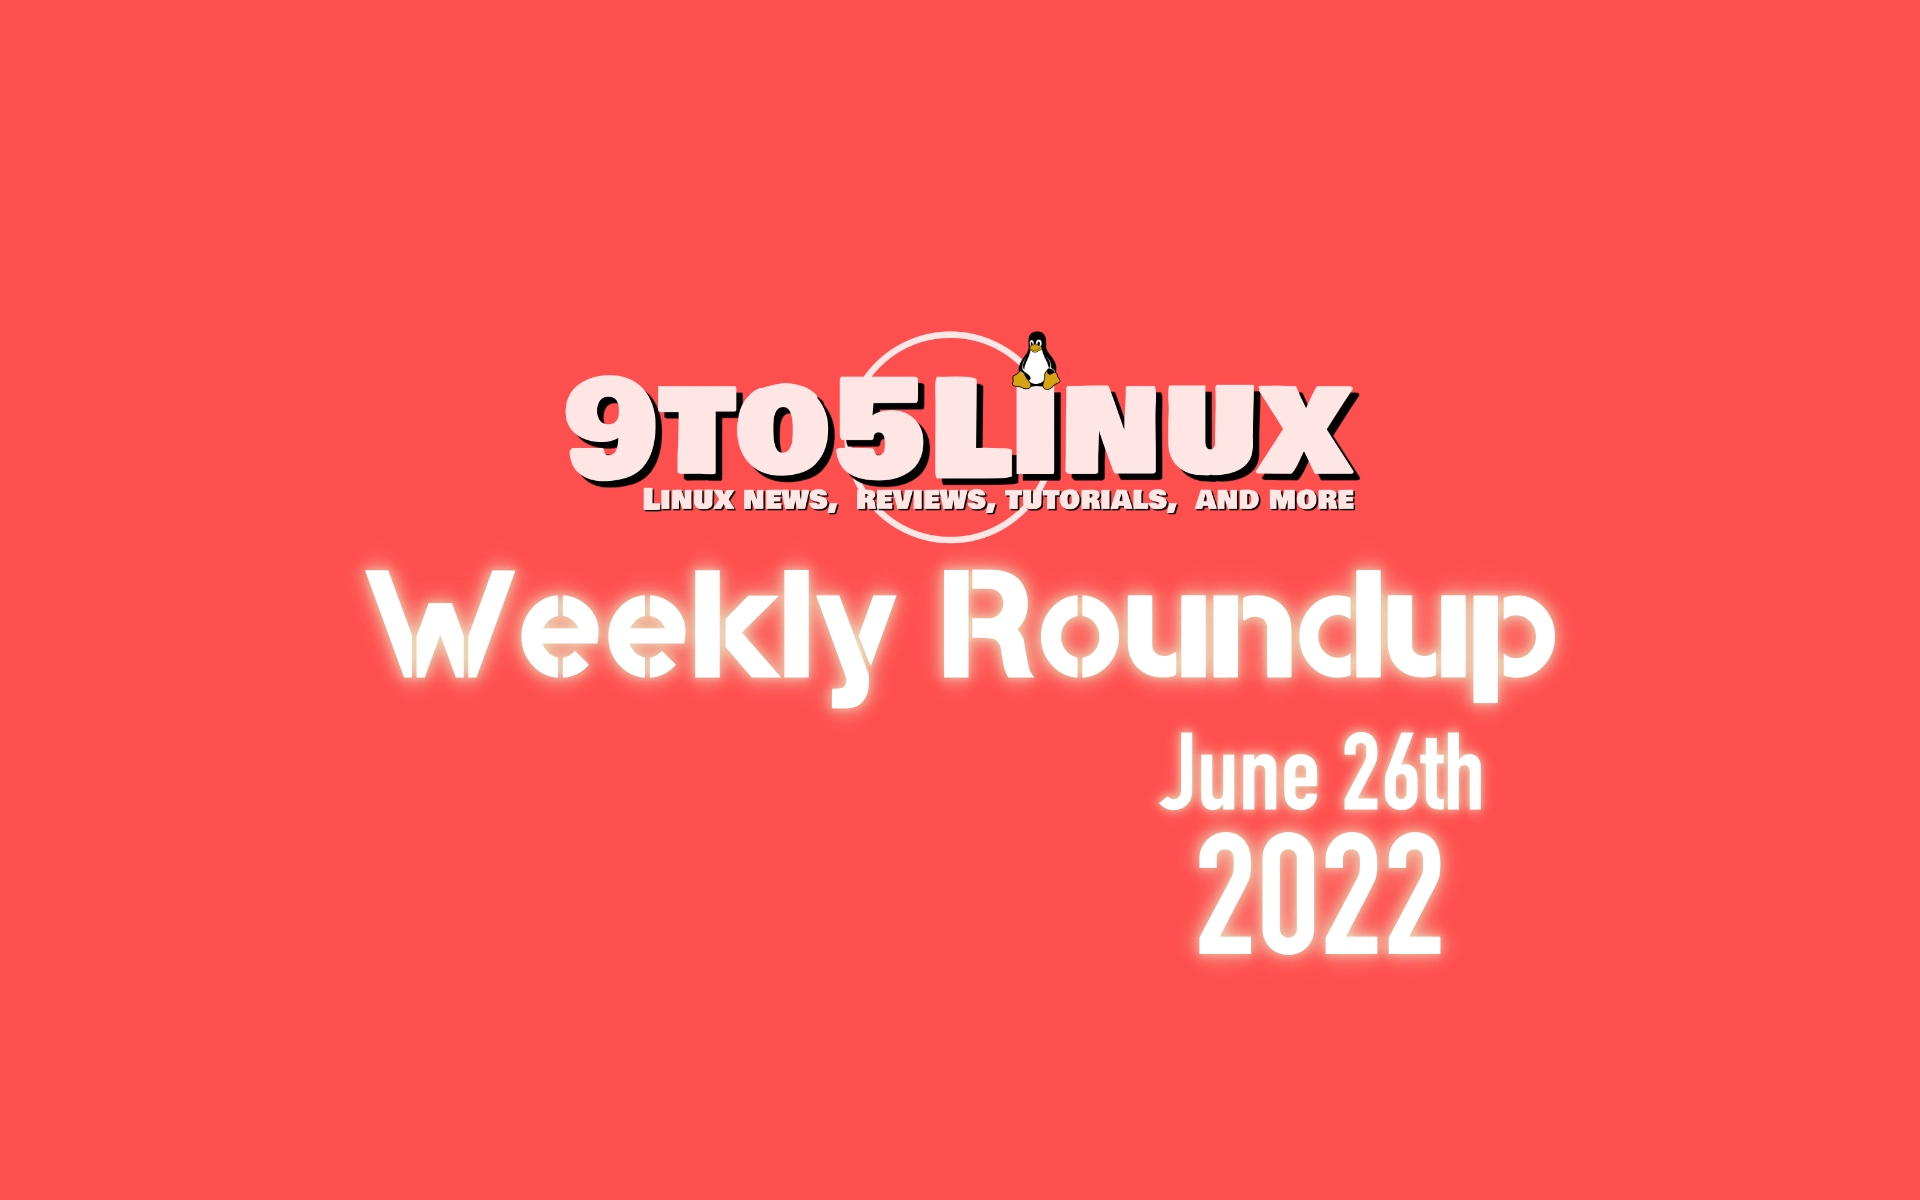 9to5Linux Weekly Roundup: June 26th, 2022